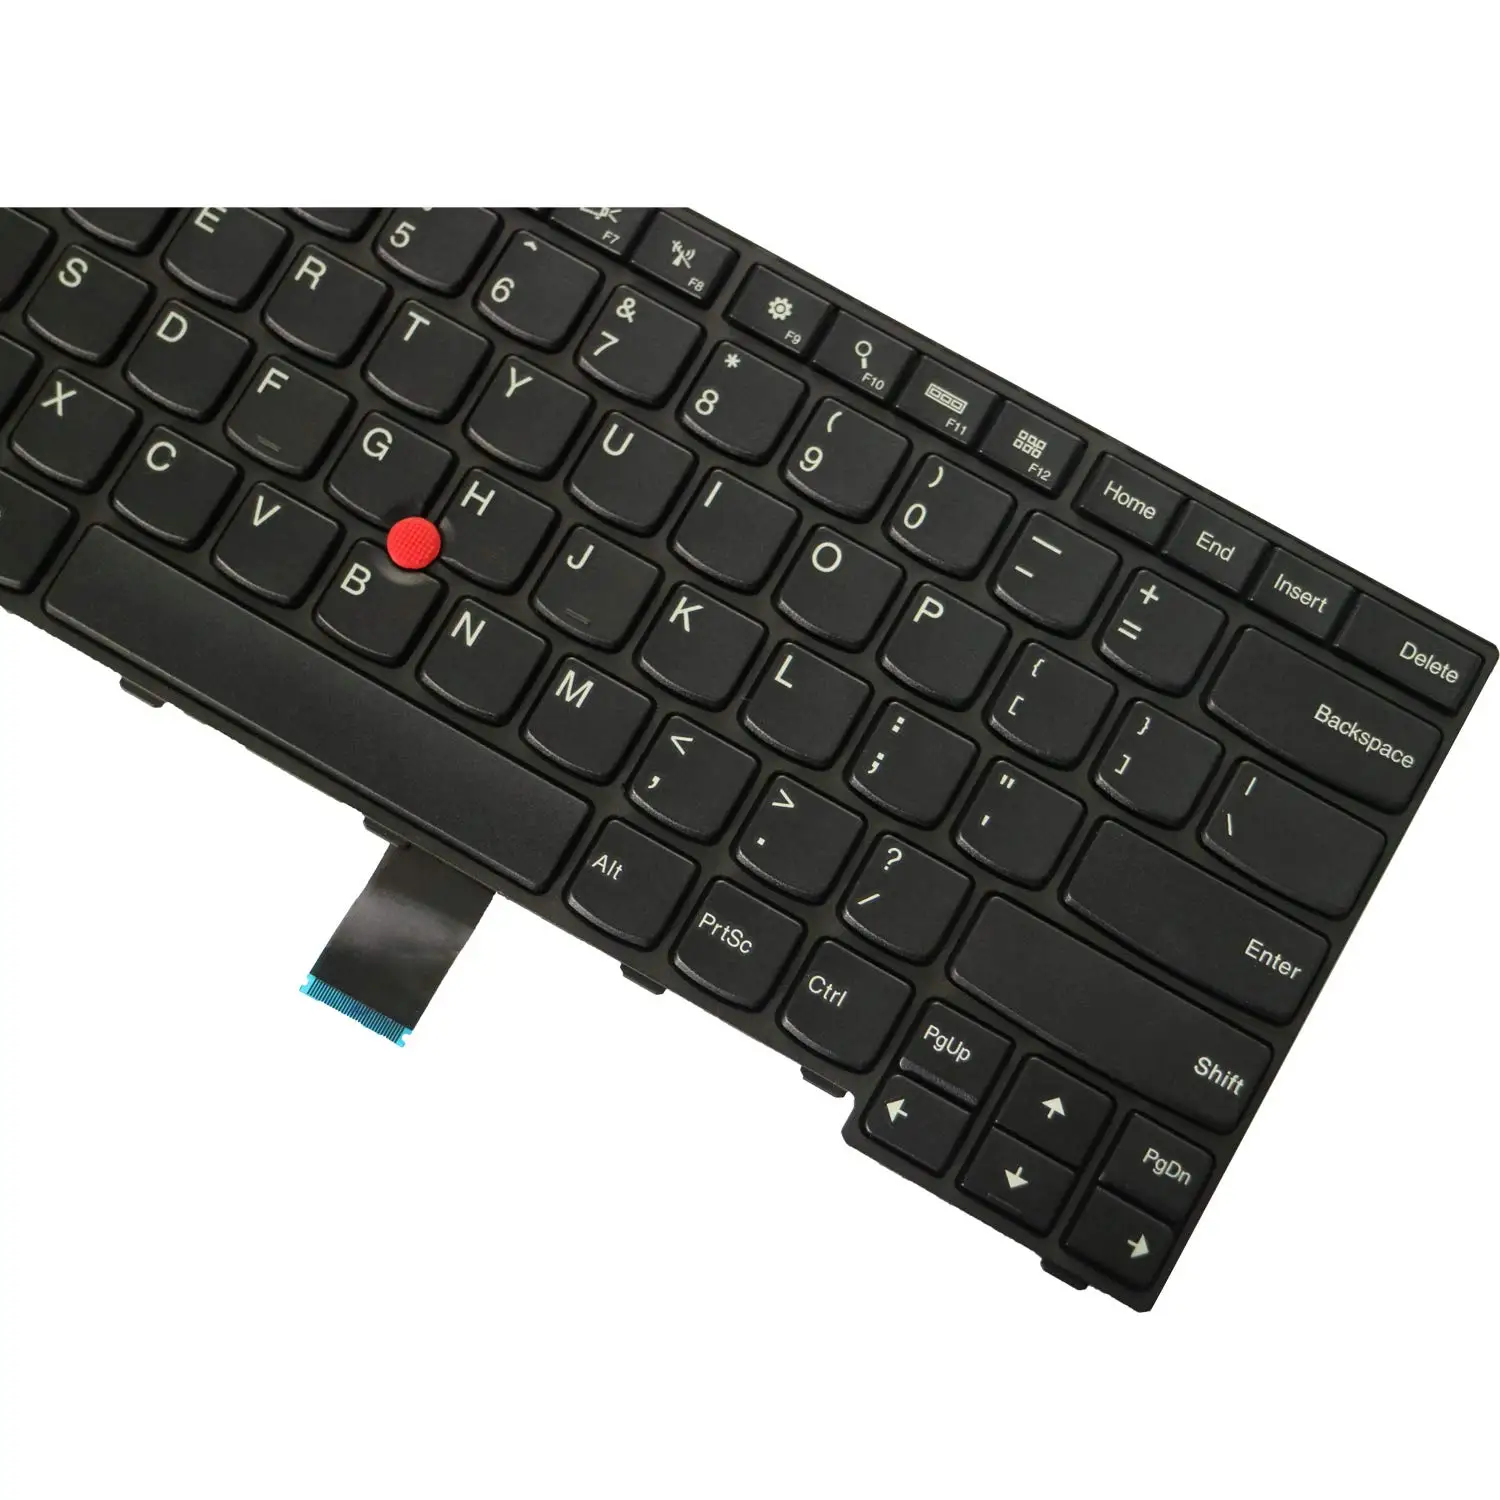 Laptop Replacement Keyboard For Lenovo Thinkpad E450 E450c E455 E460 E465  W450 Keyboard - Buy E450 E450c E455 E460 E465 W450 Keyboard,Laptop  Replacement Keyboard,Keyboard Product on 